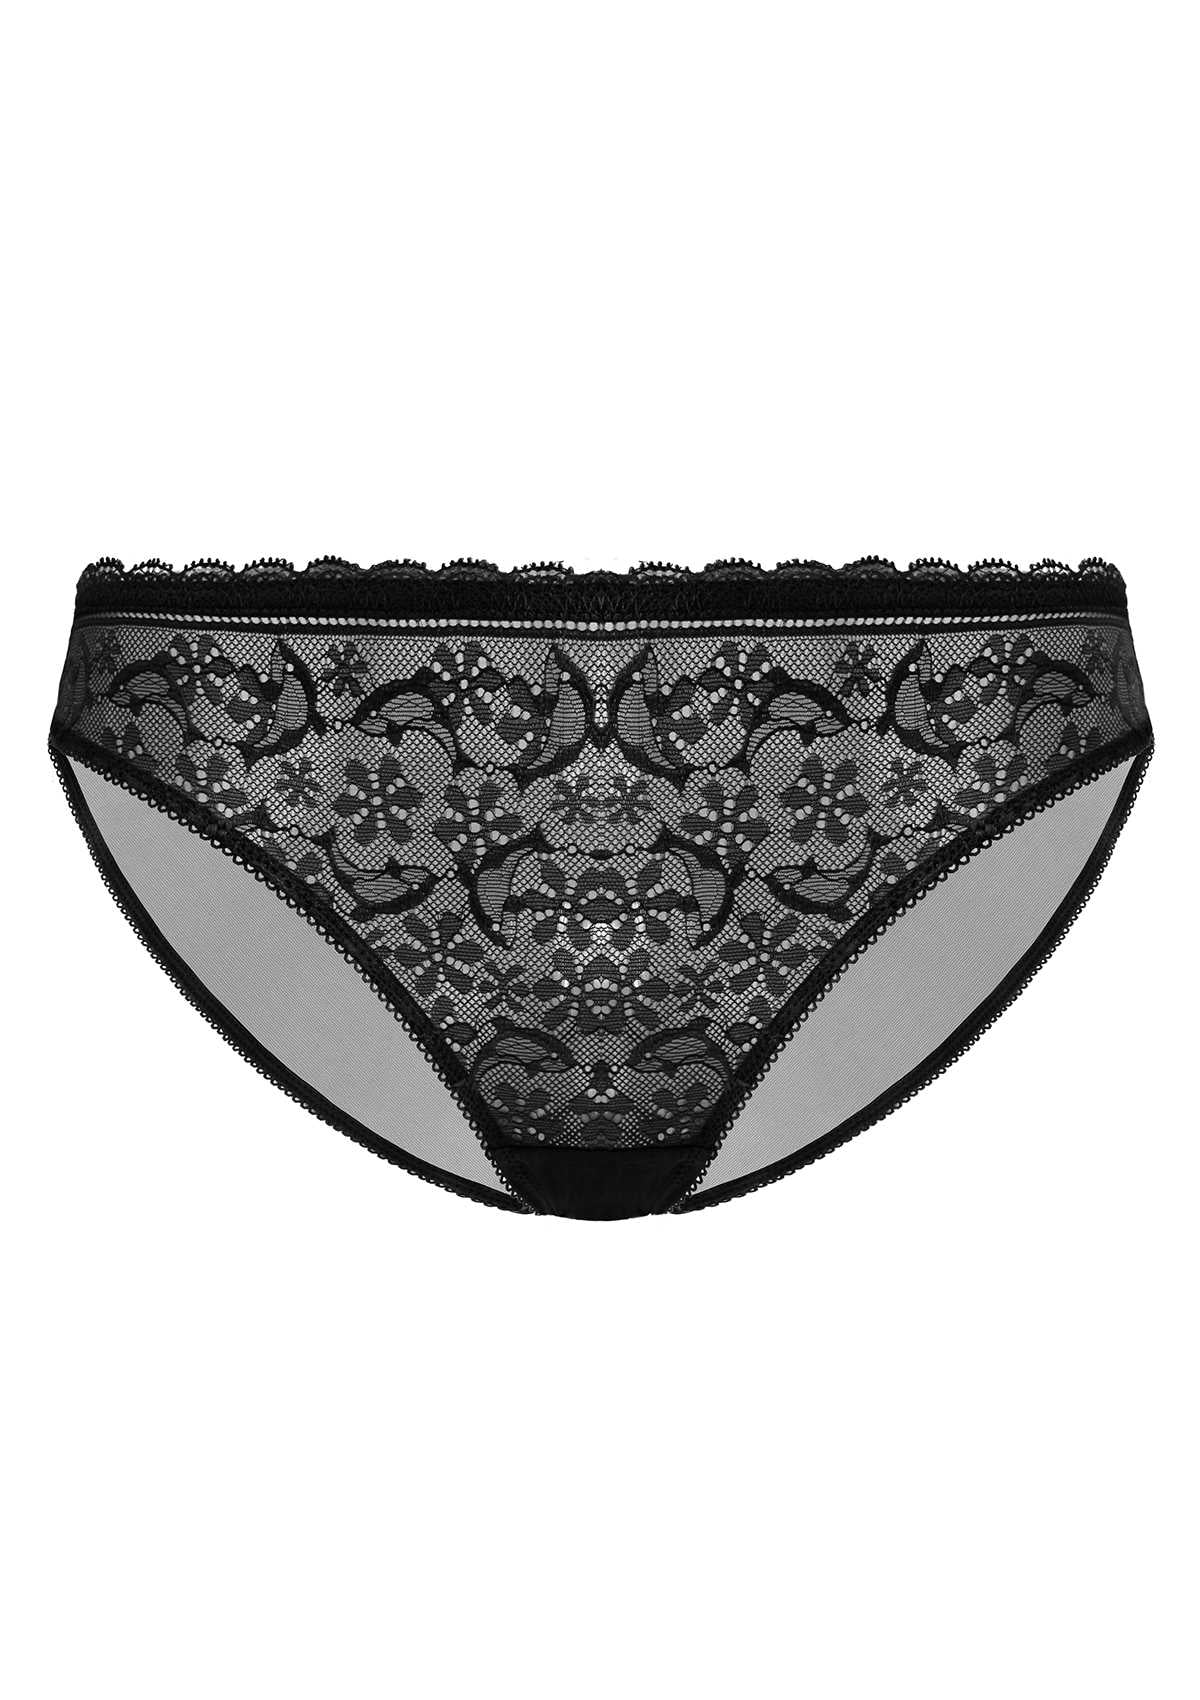 HSIA Anemone Lace Dolphin-Patterned Front And Mesh Back Panties-3 Pack - S / Black+Burgundy+White